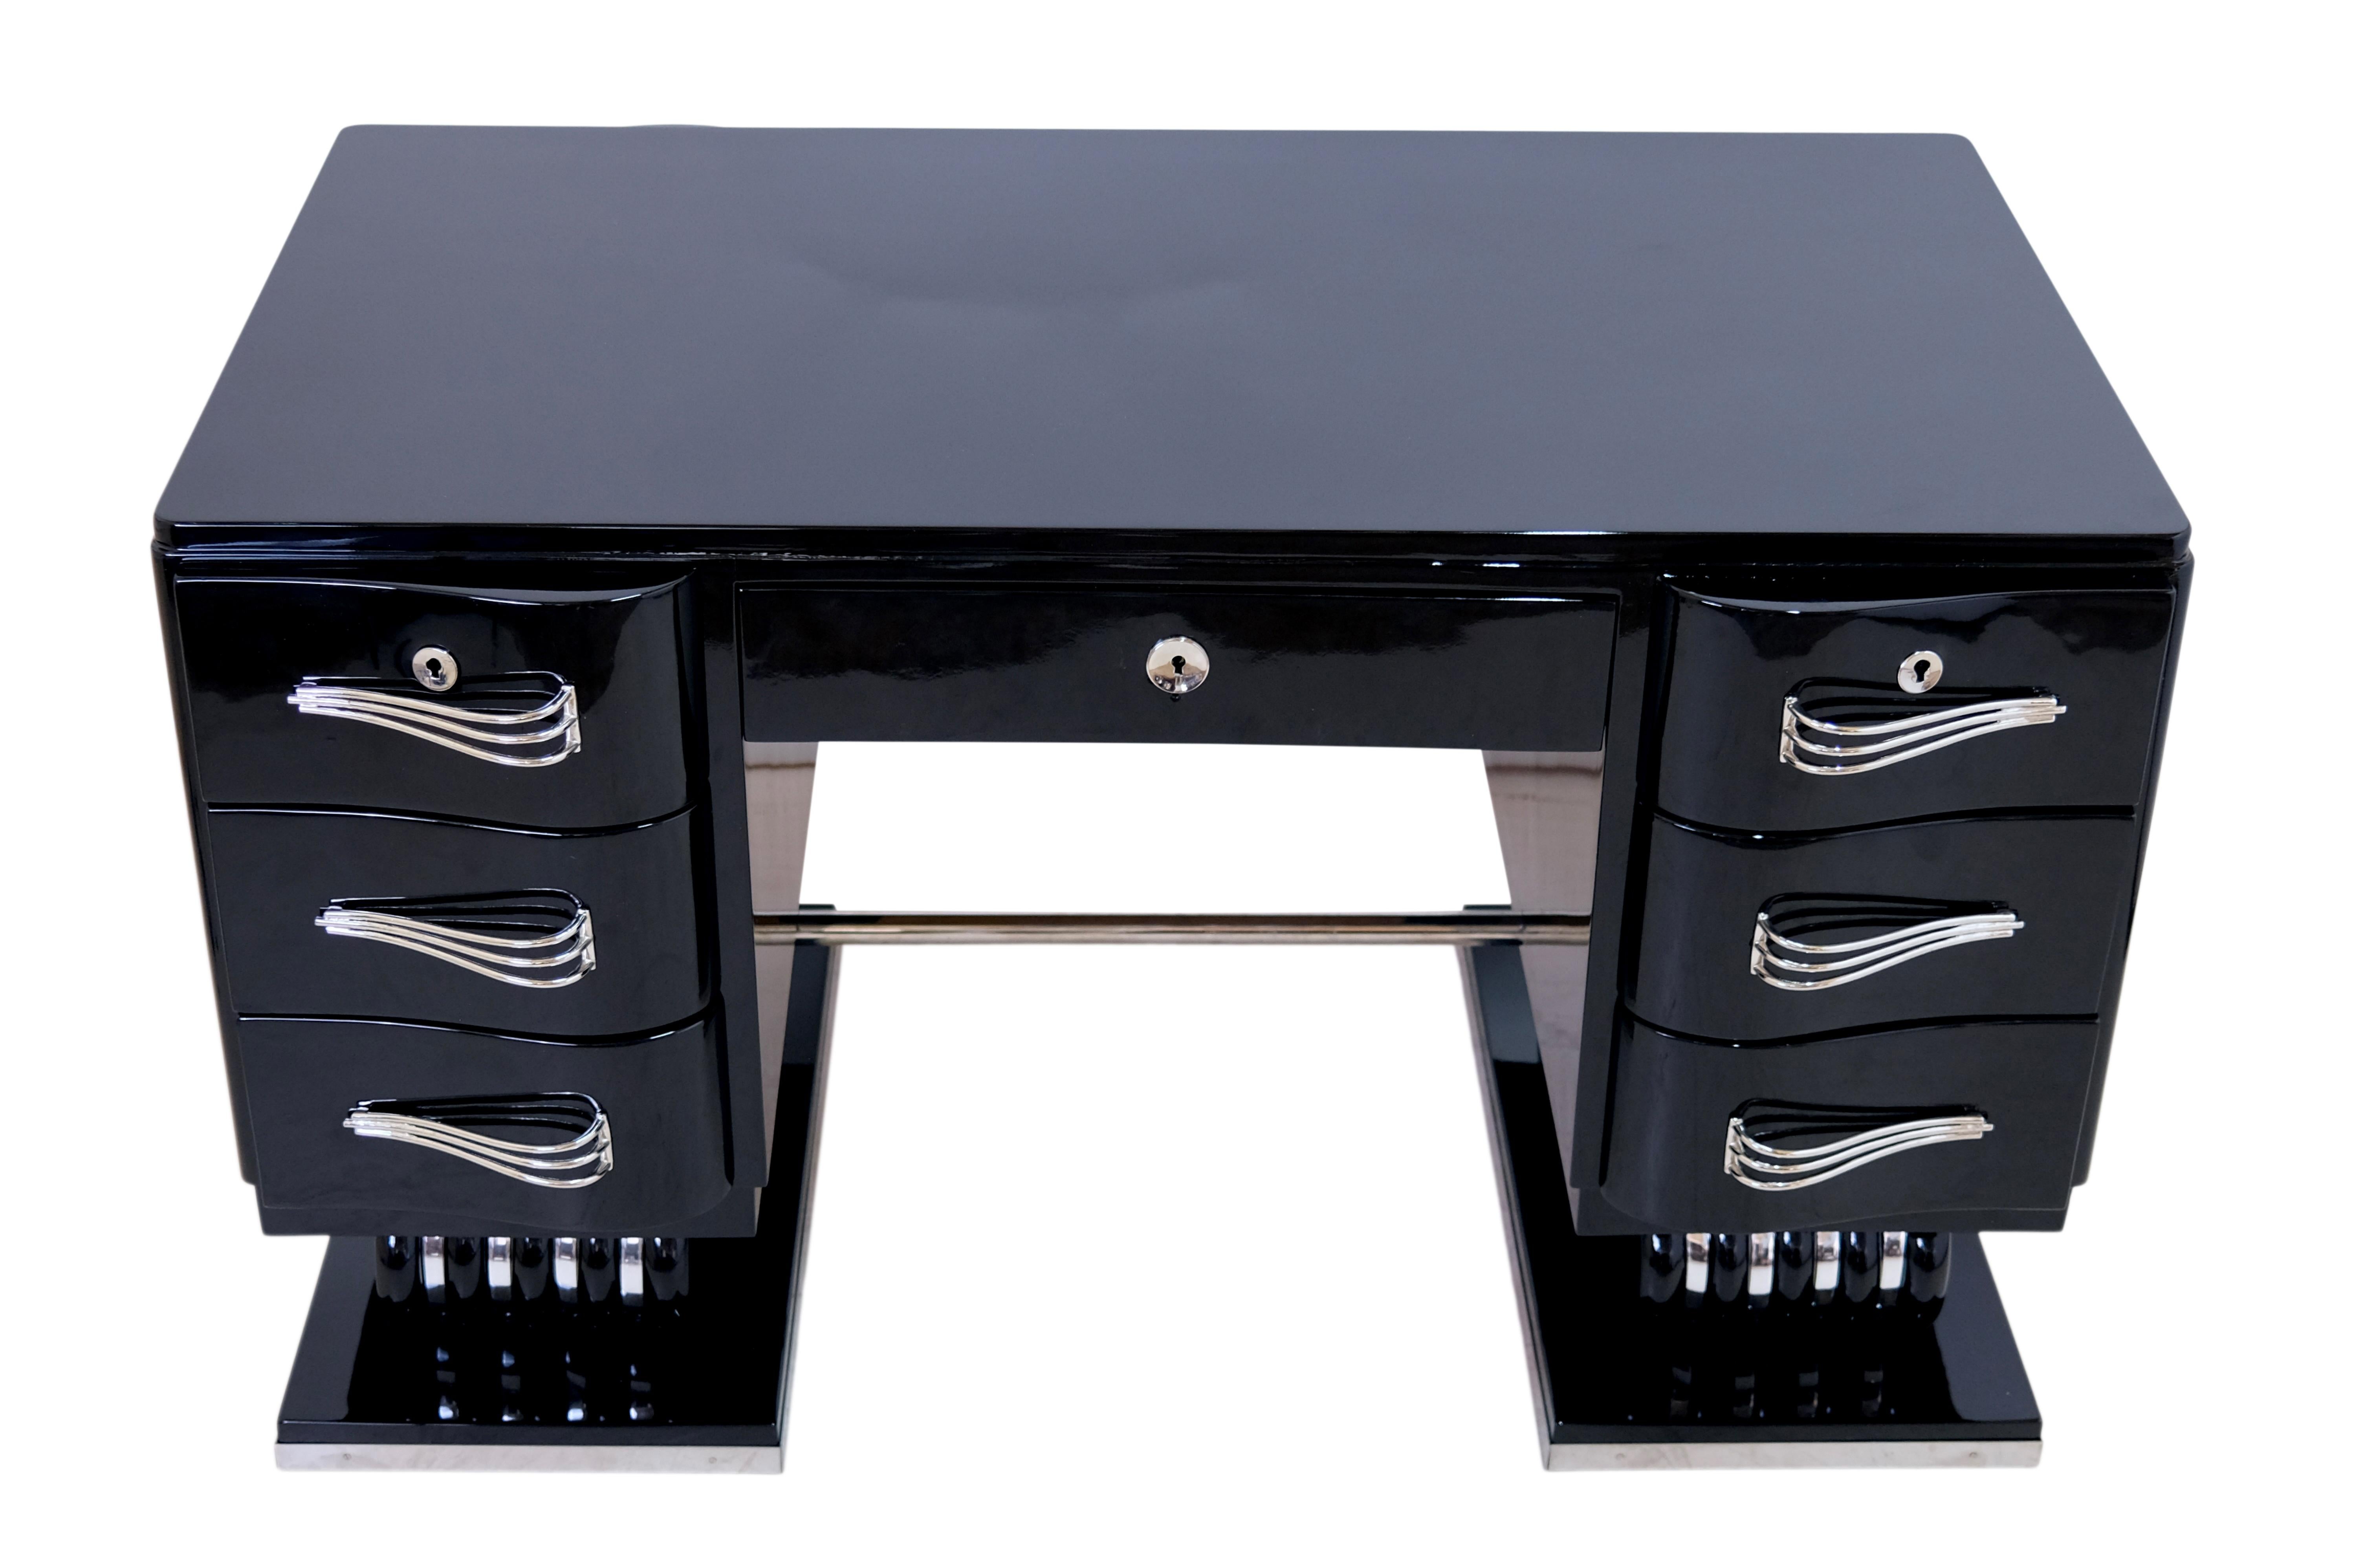 Desk
Piano lacquer, black high gloss
Metal applications, freshly nickel-plated
Non-functional drawers on the back

Original Art Deco, France 1930s

Dimensions:
Width: 130 cm
Height: 79 cm
Depth: 80 cm
Working depth: 69 cm